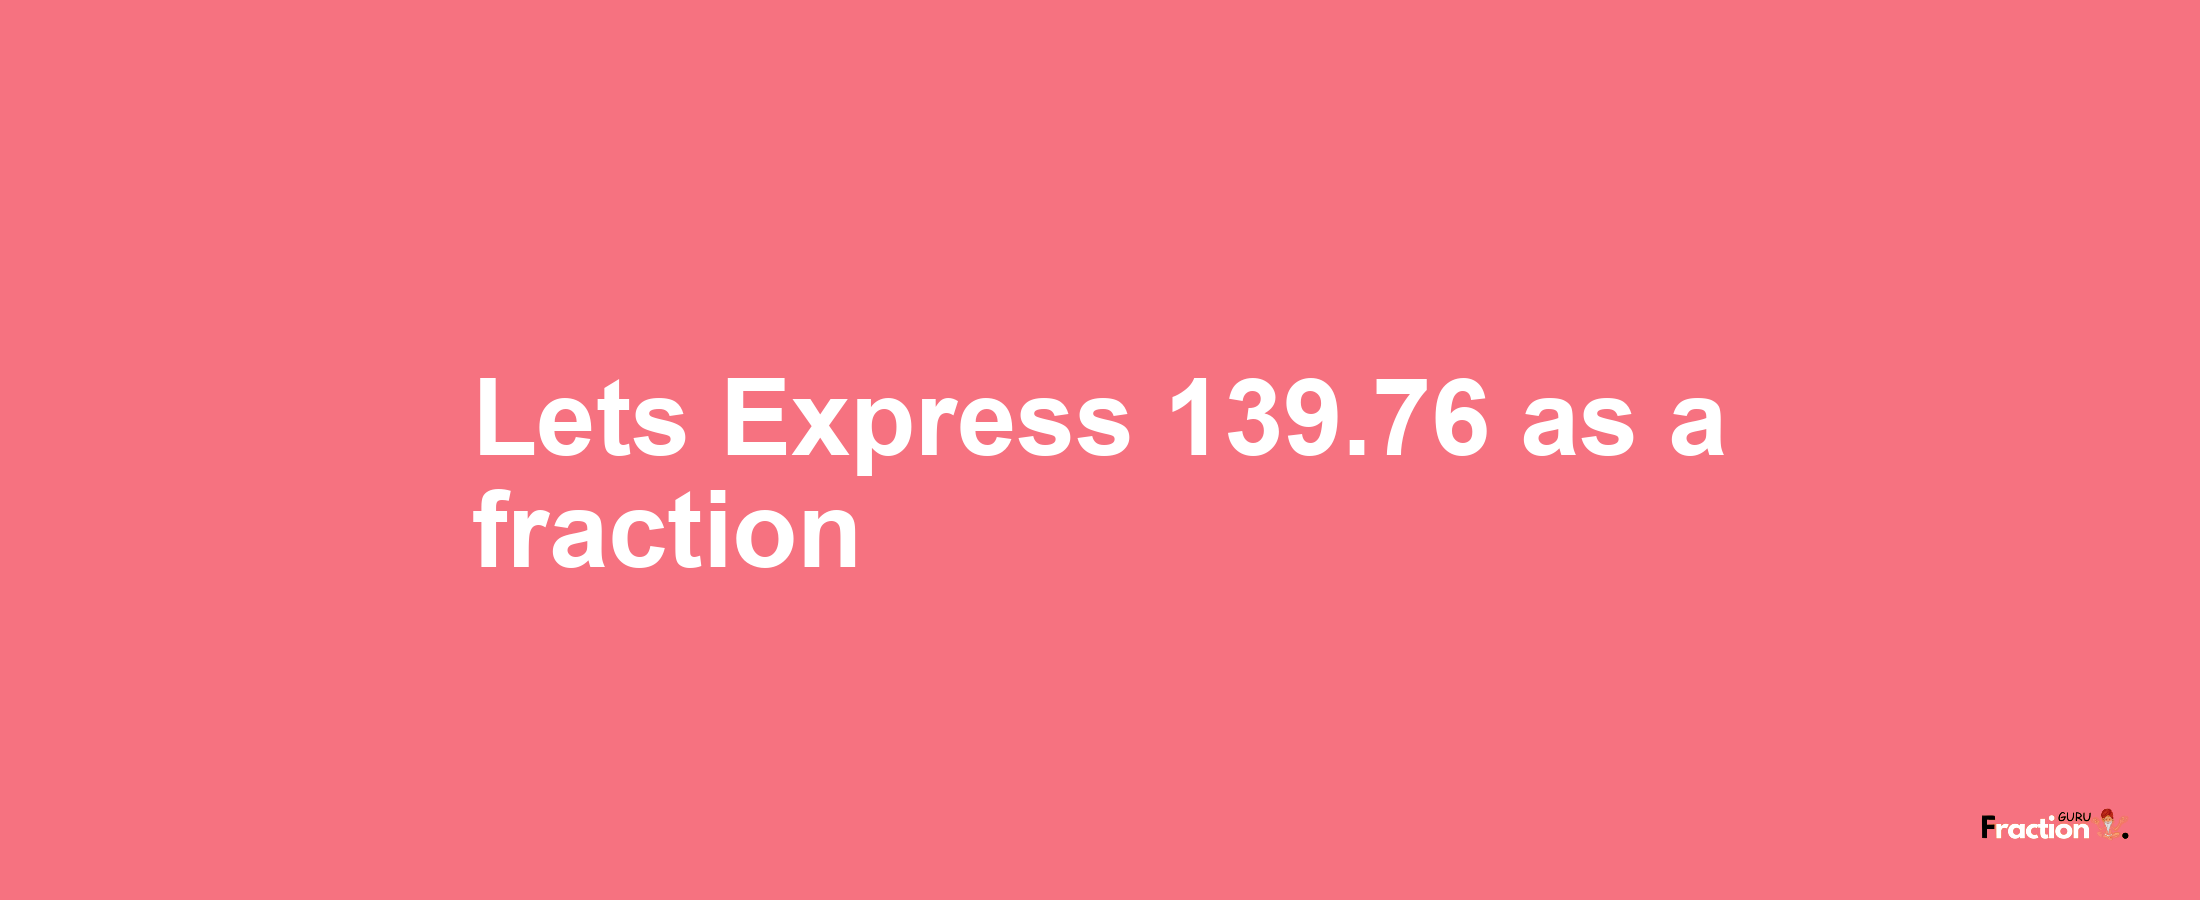 Lets Express 139.76 as afraction